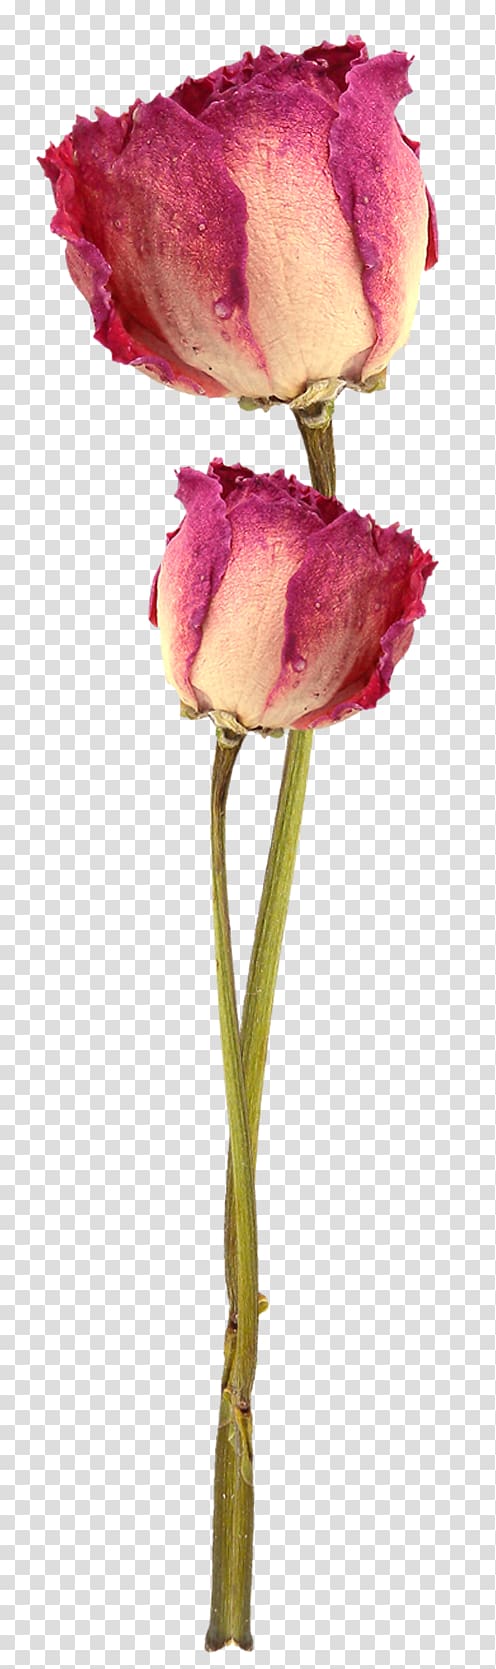 Garden roses Cut flowers Tulip Bud, rose transparent background PNG clipart